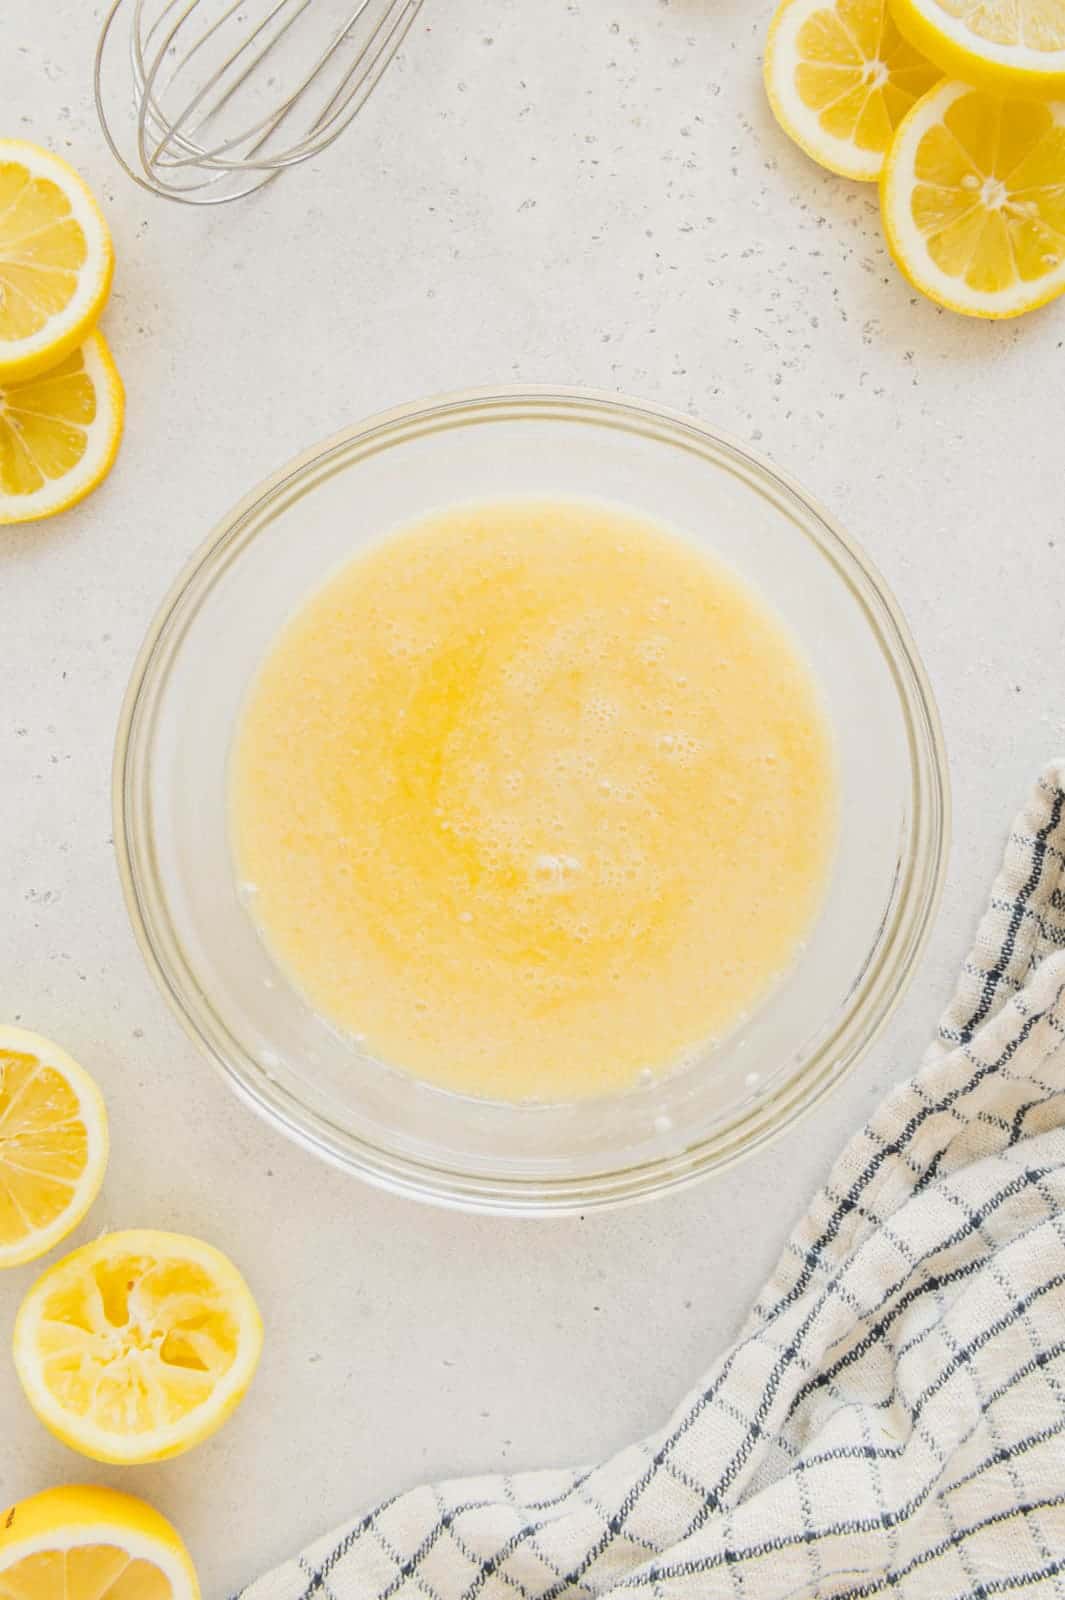 Wet ingredients for lemon donuts in a glass bowl.